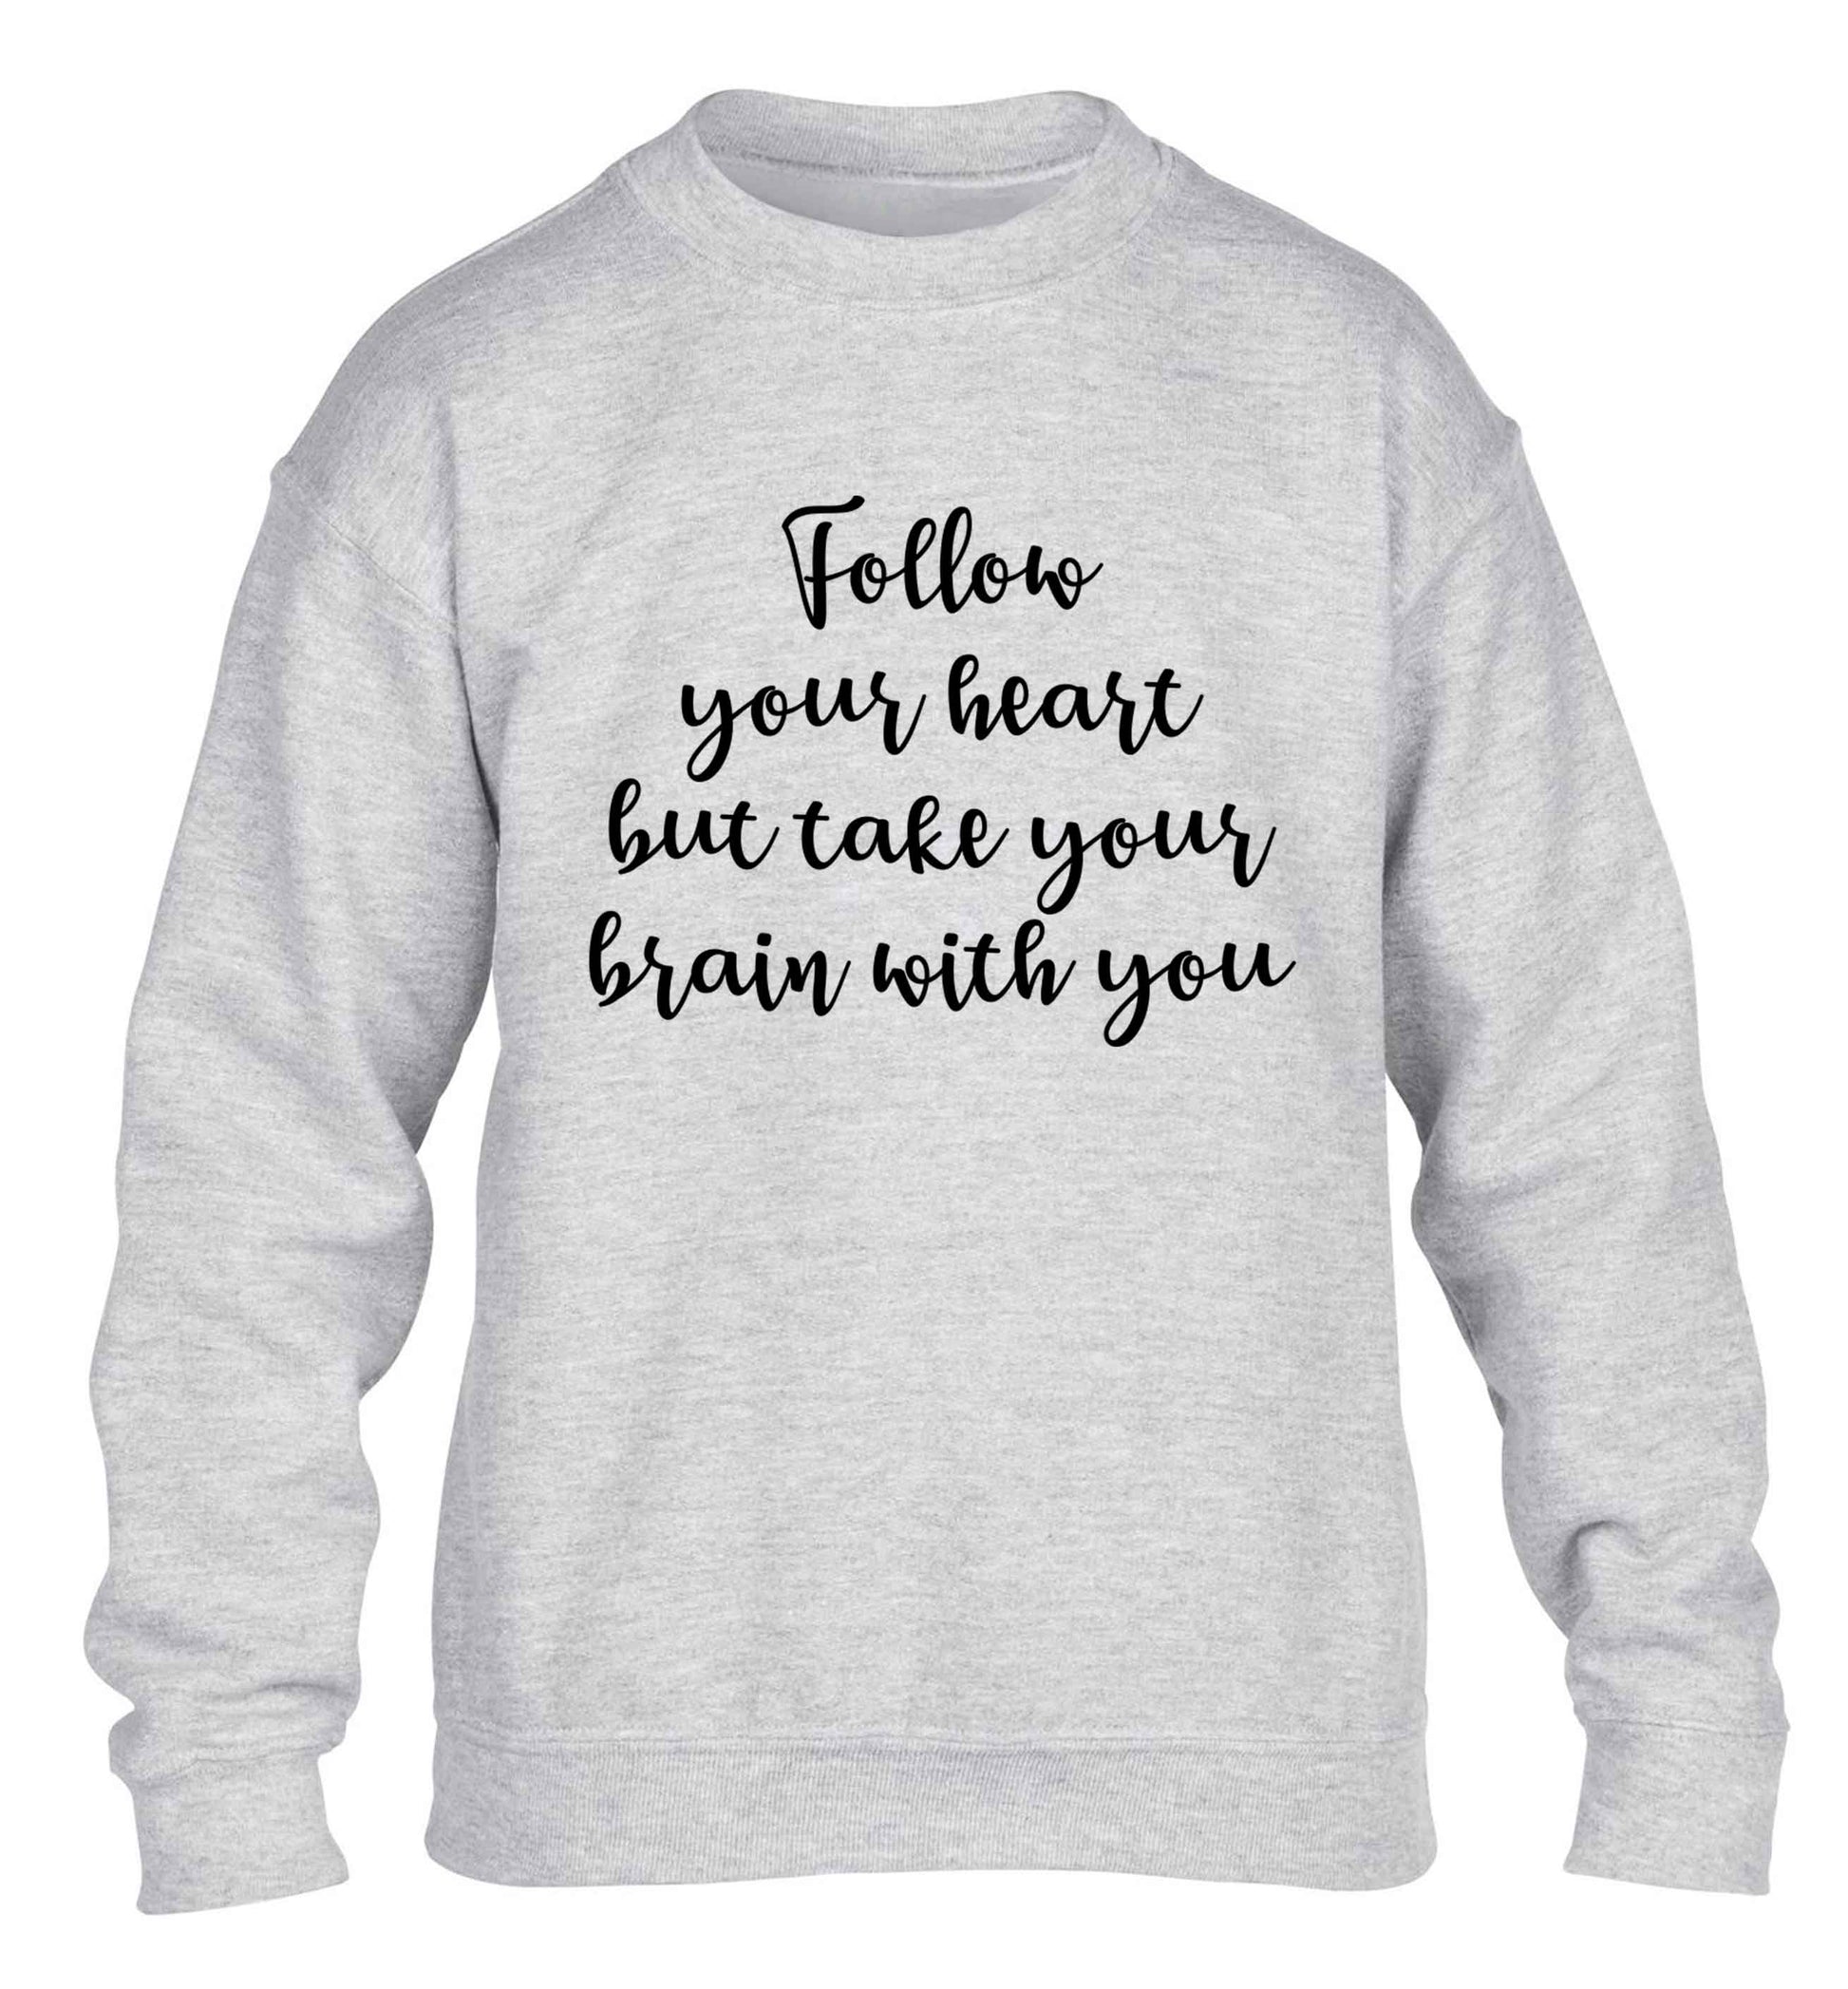 Follow your heart but take your head with you children's grey sweater 12-13 Years